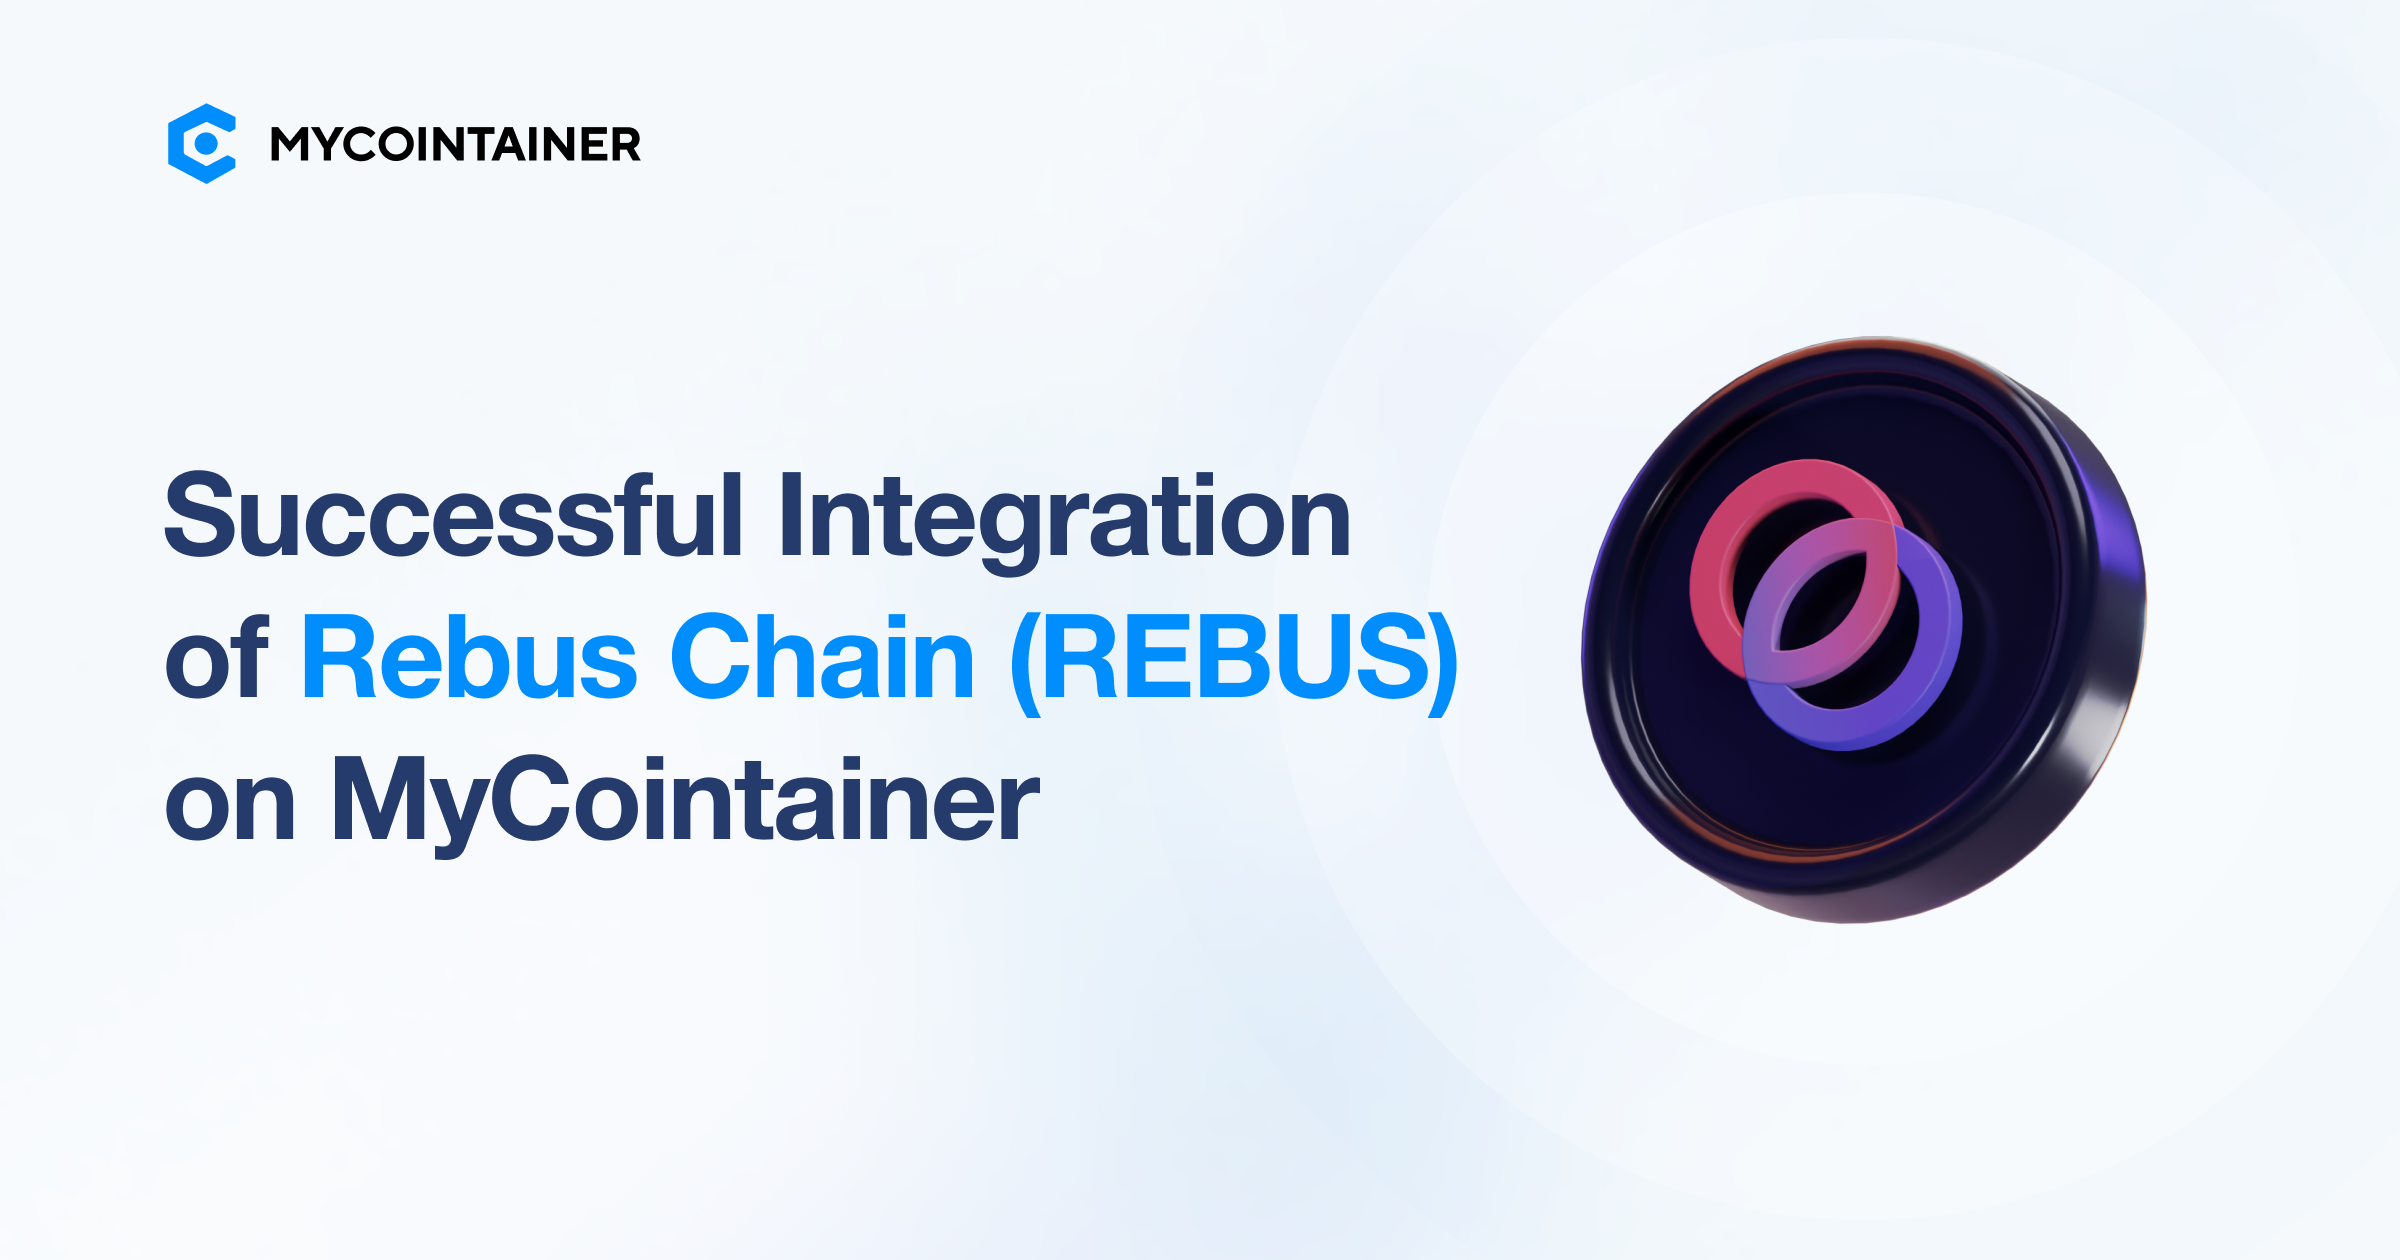 Effortless Staking of Rebus Chain (REBUS) on MyCointainer